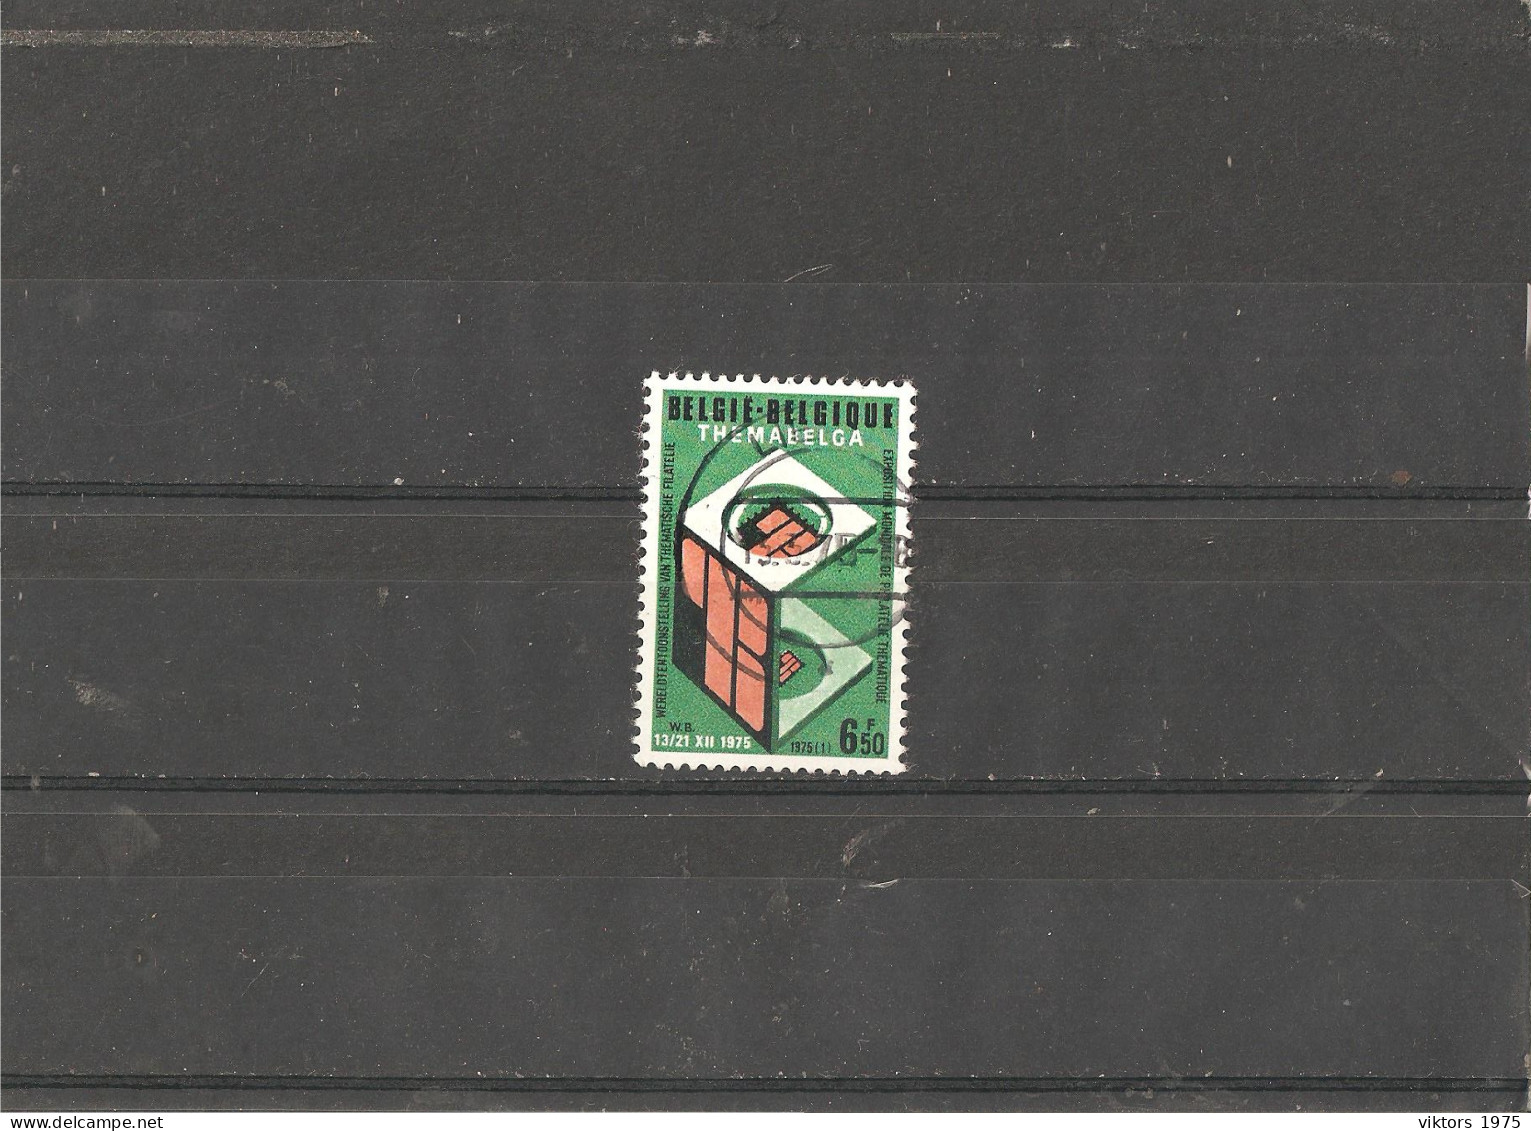 Used Stamp Nr.1798 In MICHEL Catalog - Used Stamps